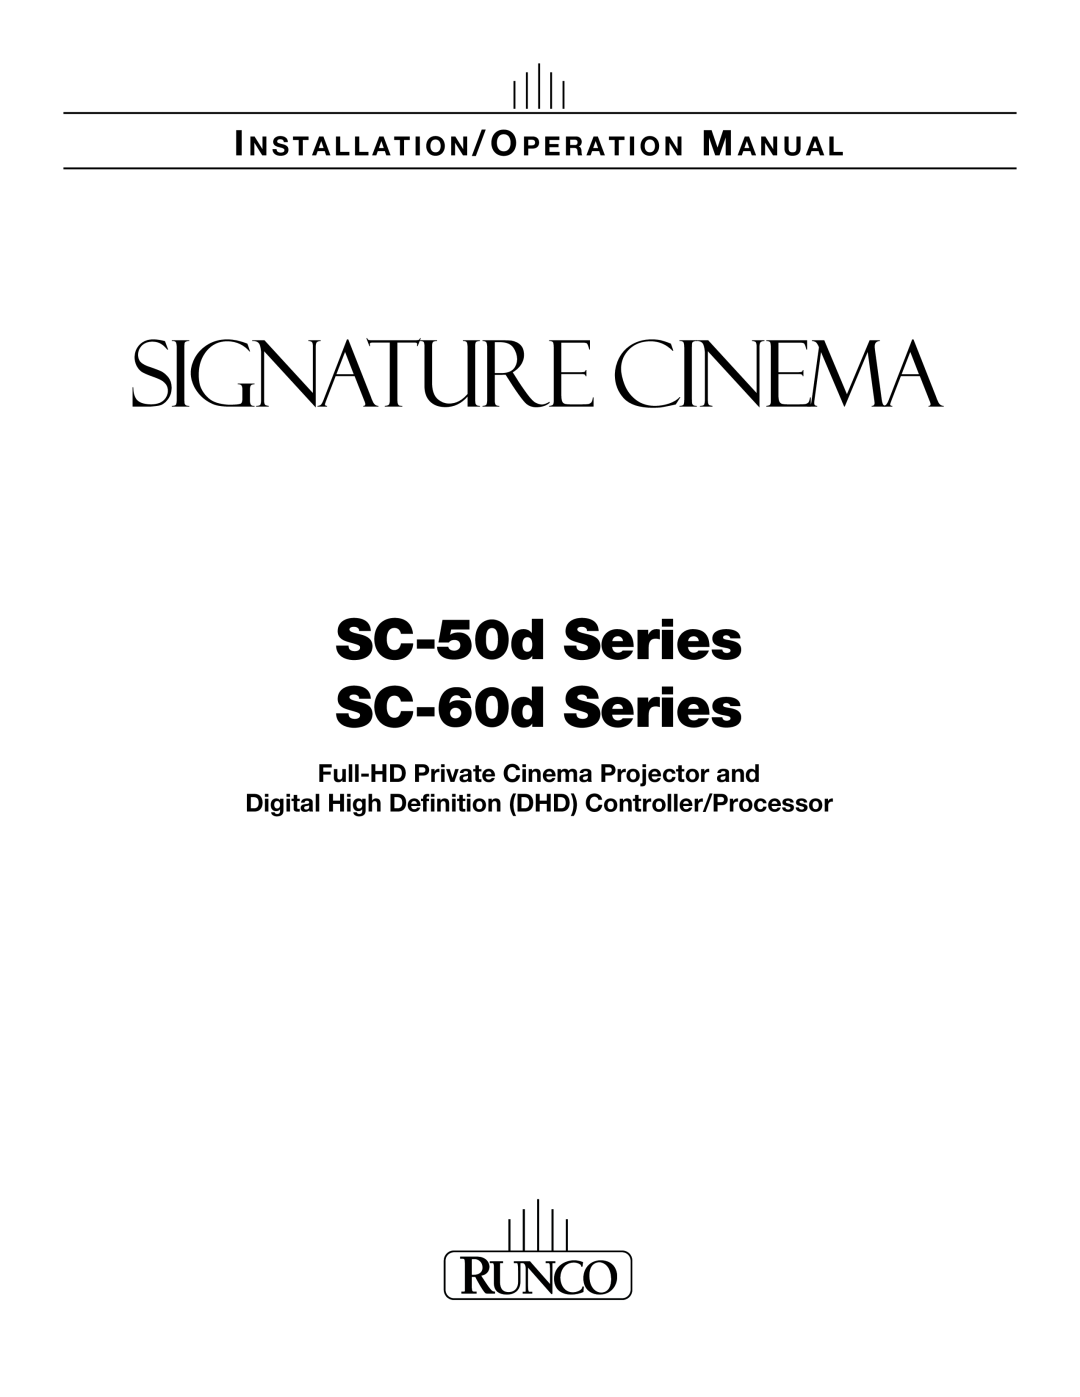 Runco SC-50D, SC-60D operation manual SC-50dSeries SC-60dSeries, Full-HDPrivate Cinema Projector and 